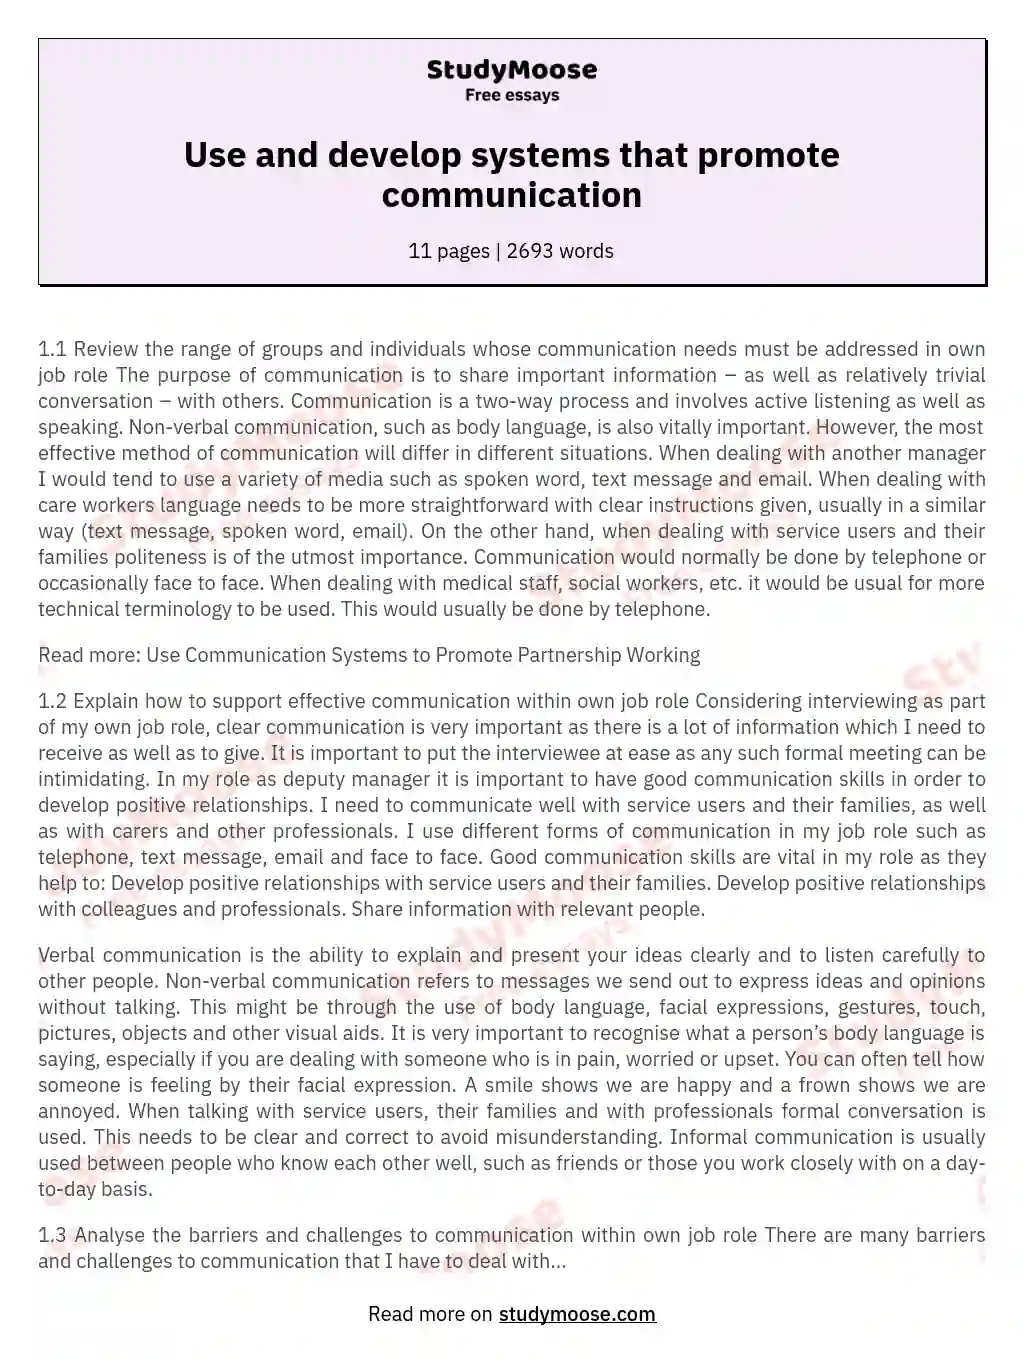 Use and develop systems that promote communication essay